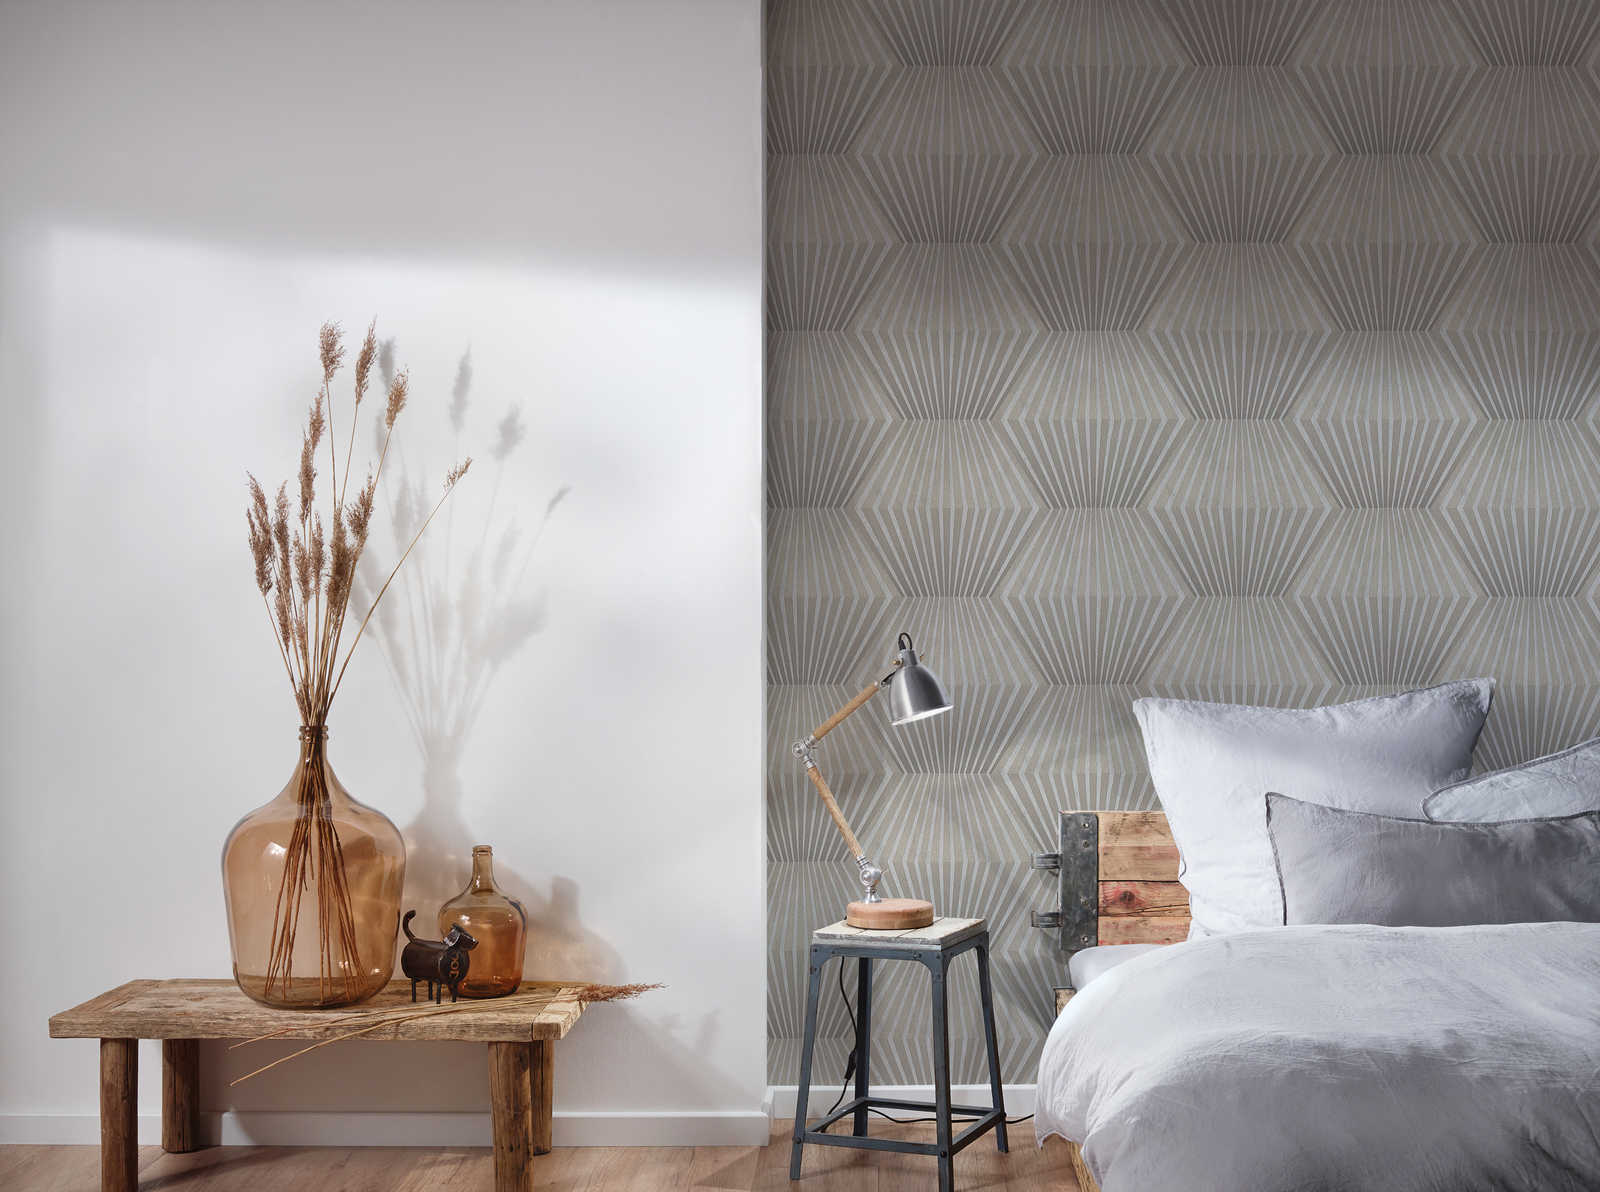             Art Deco wallpaper with line pattern & metallic whole - Brown, Grey
        